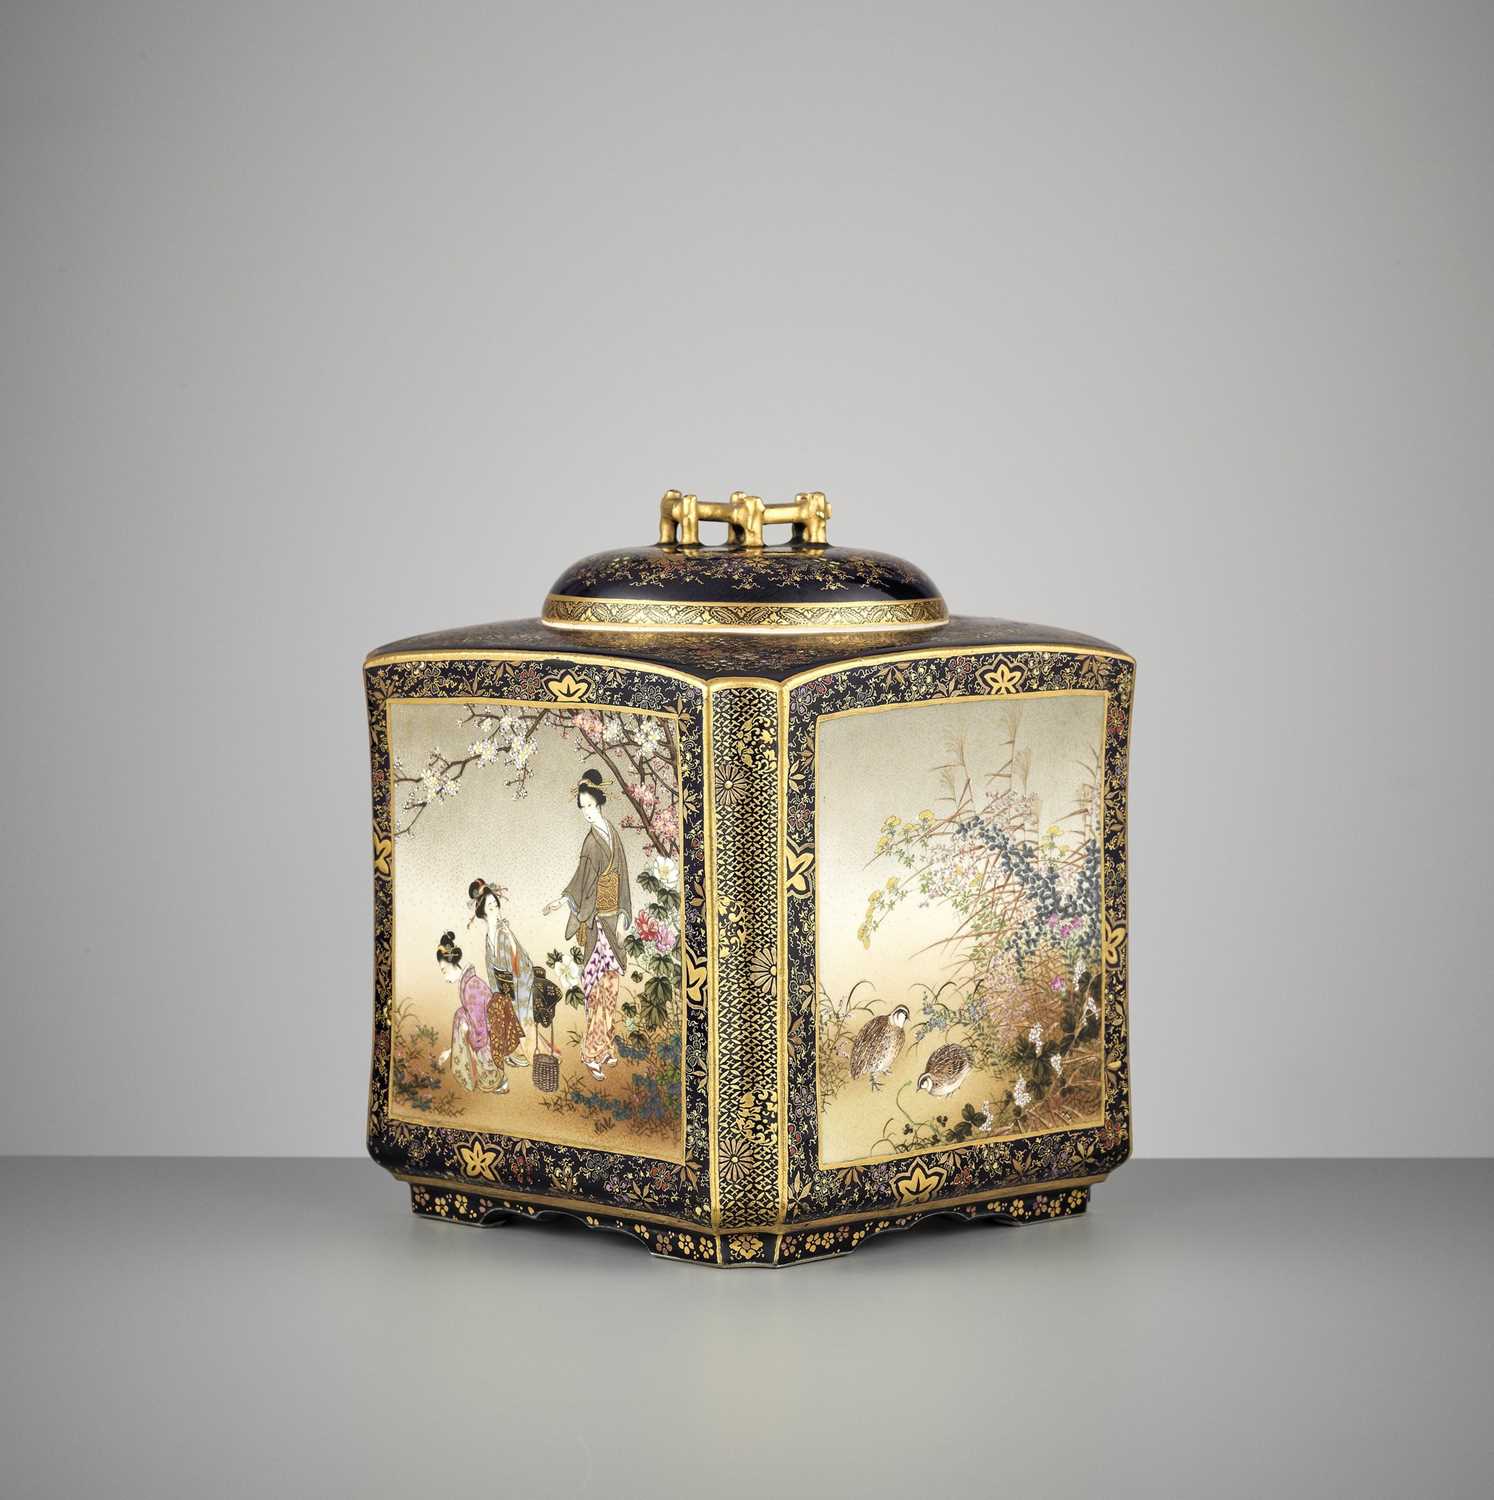 Lot 117 - KINKOZAN: A SUPERB AND LARGE SATSUMA CERAMIC LIDDED JAR WITH POLYCHROME ENAMELS AND GOLD PAINTING ON A MIDNIGHT BLUE GROUND